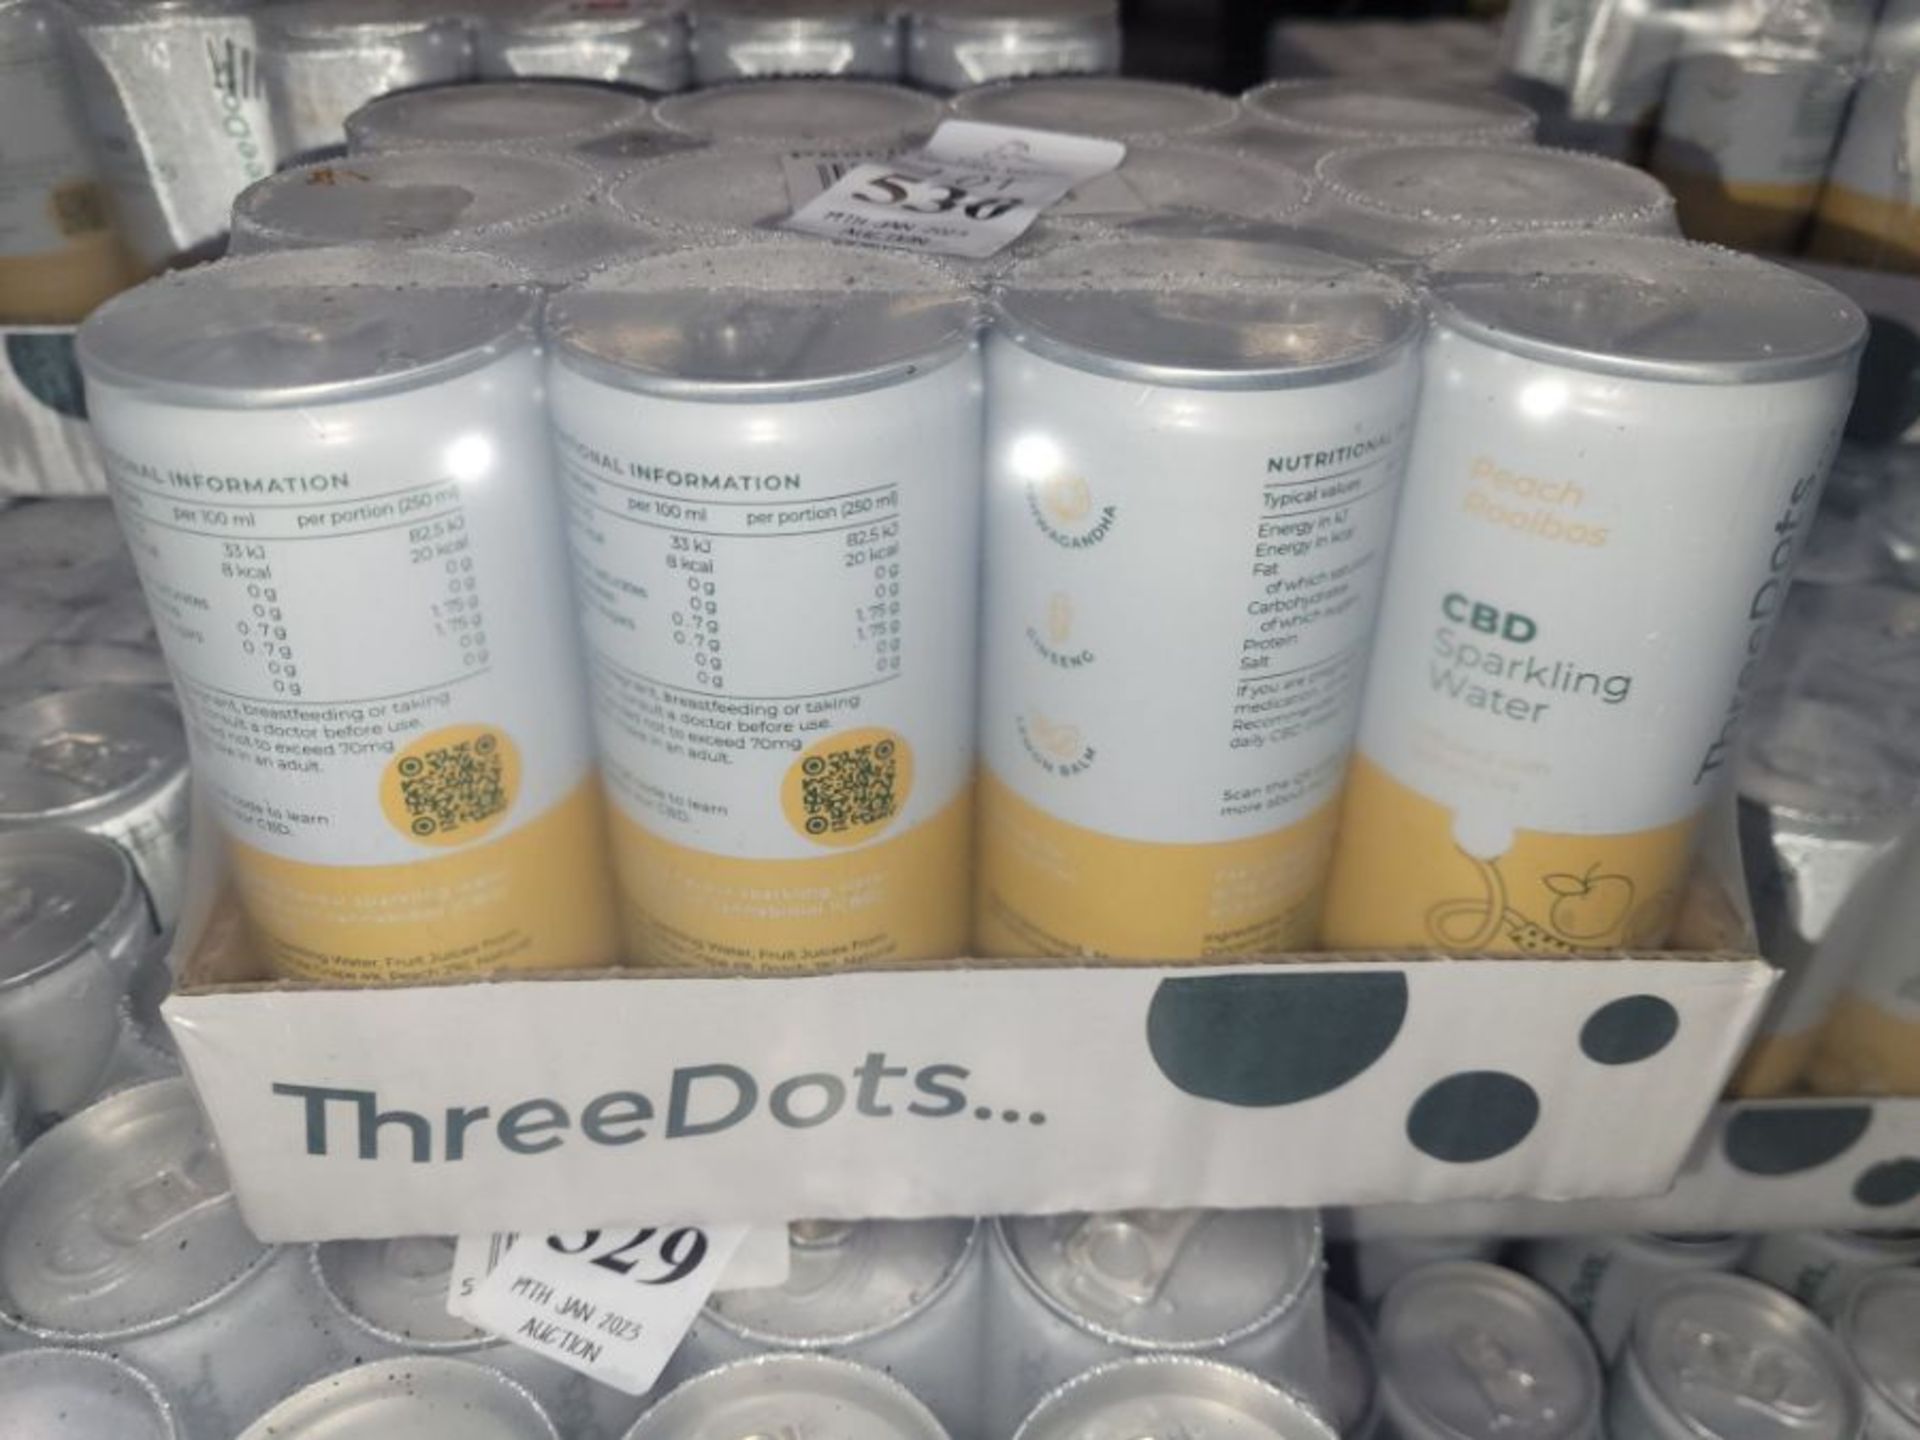 5X CASE OF 12 THREE DOTS GRAPEFRUIT CBD SPARKING WATER (60 CANS) O.O.D.